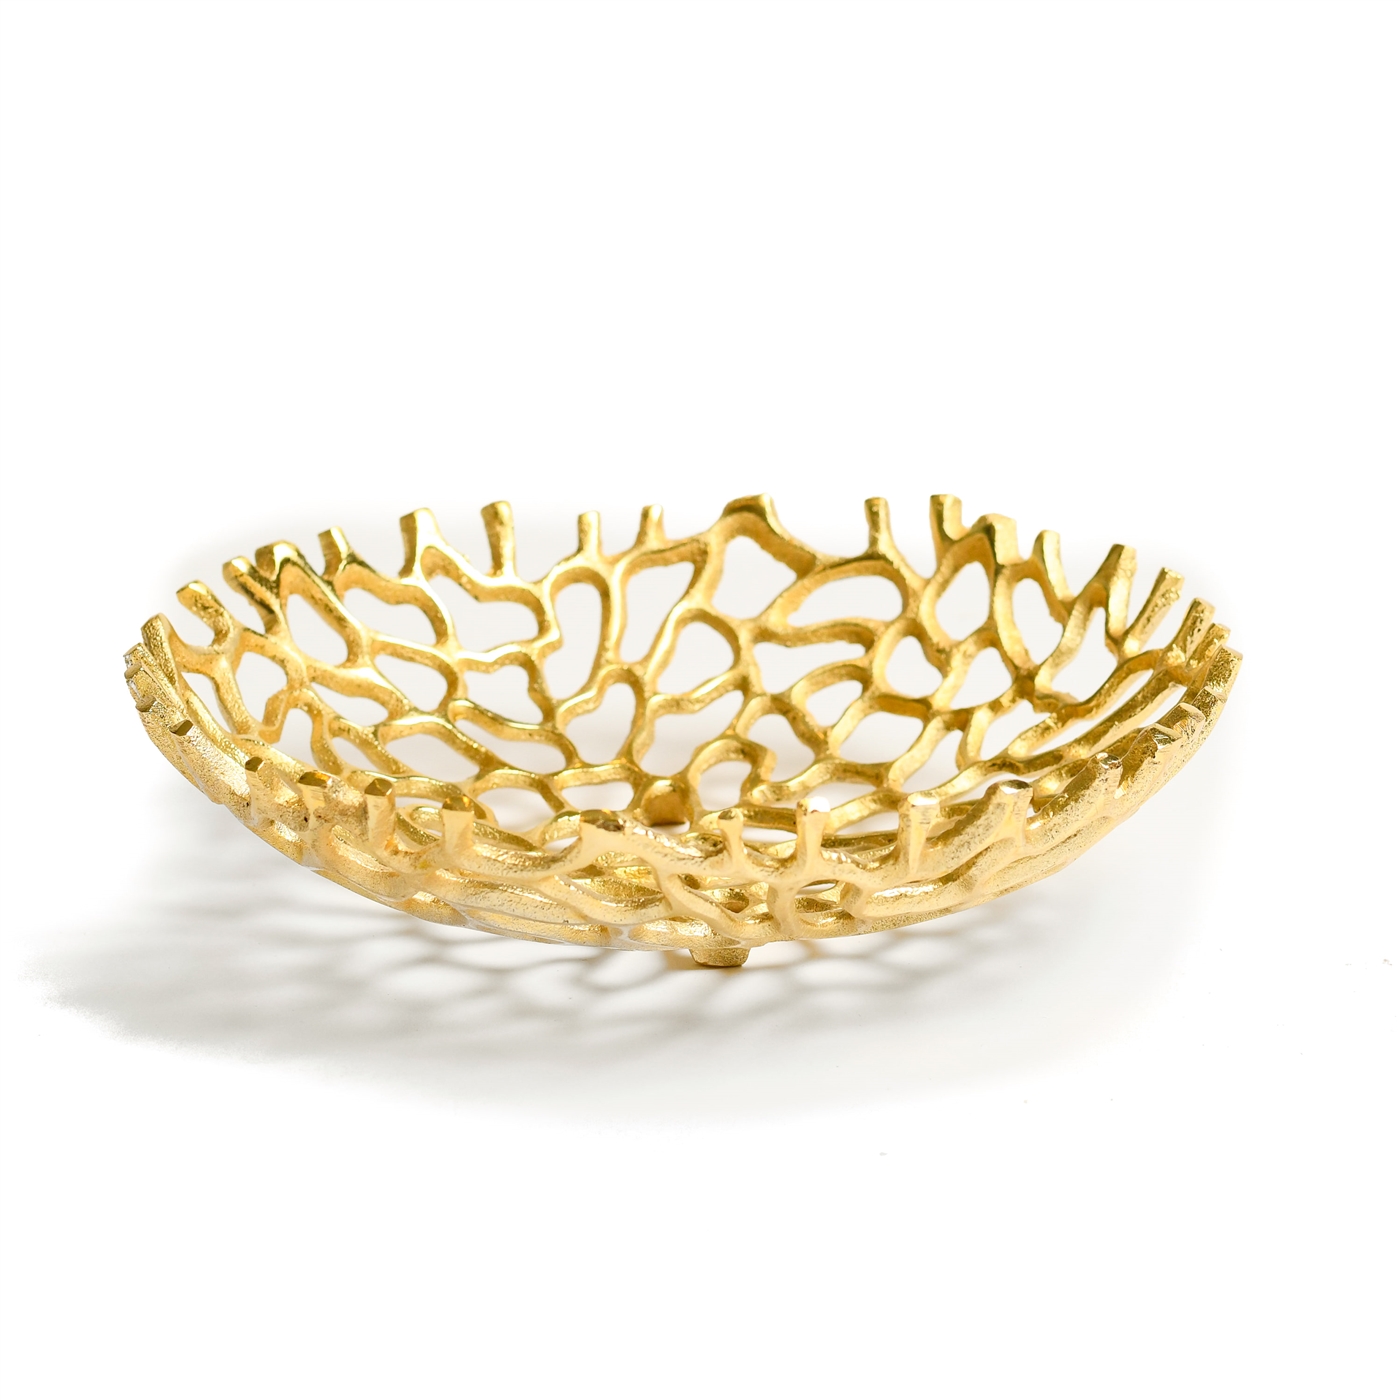 Salad Bowl with Gold Glitter Base